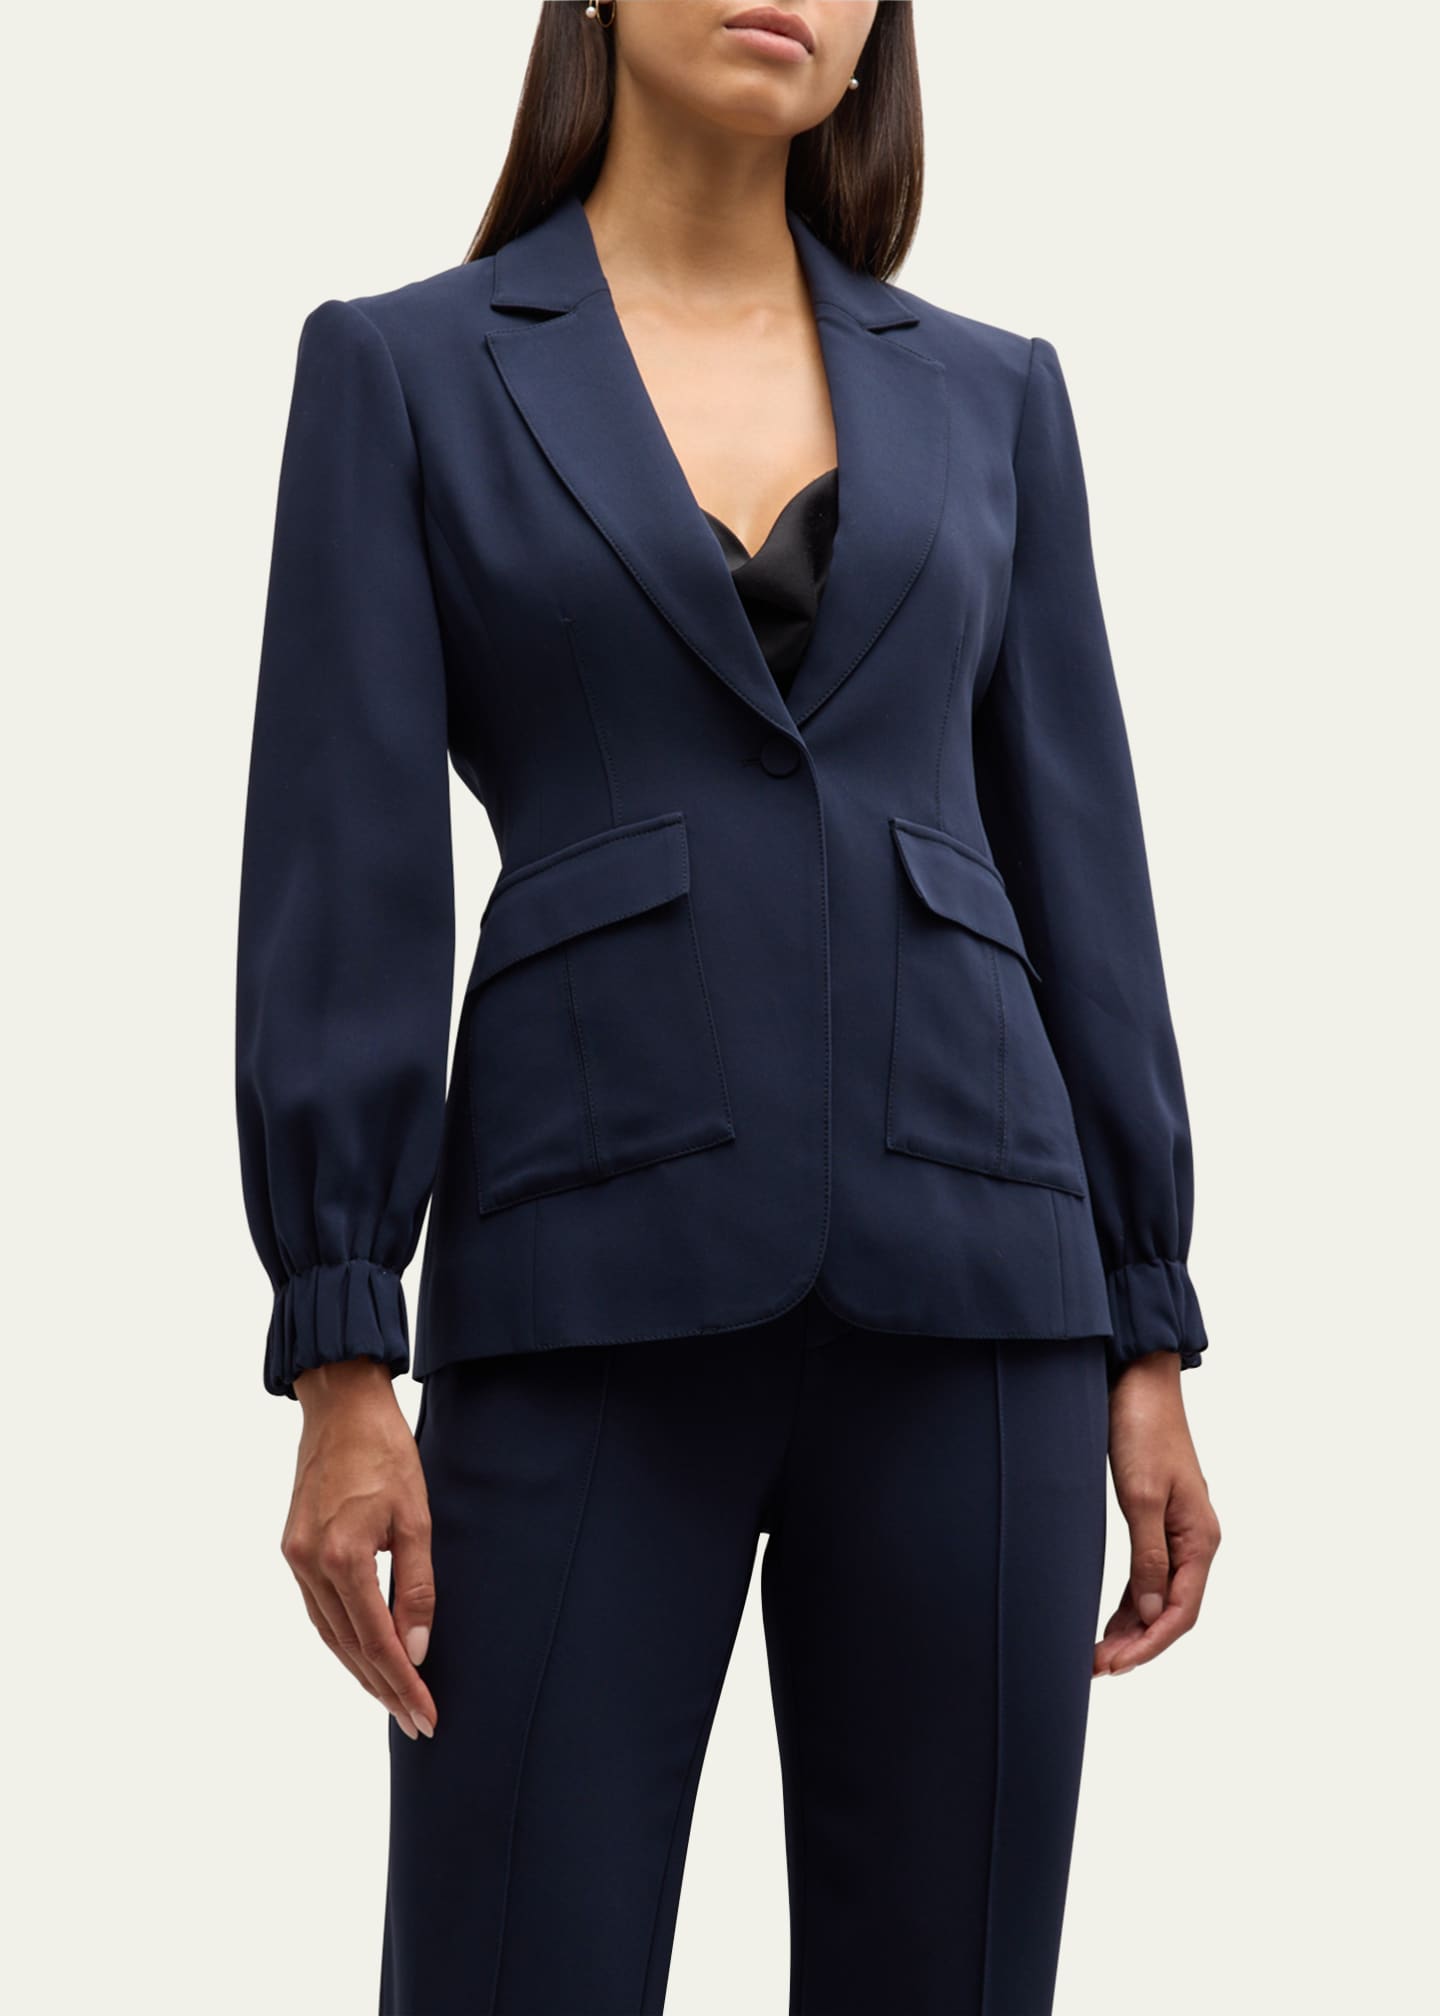 Cinq a Sept Tabitha Frill-Cuff Crepe Jacket with Cargo Pockets ...